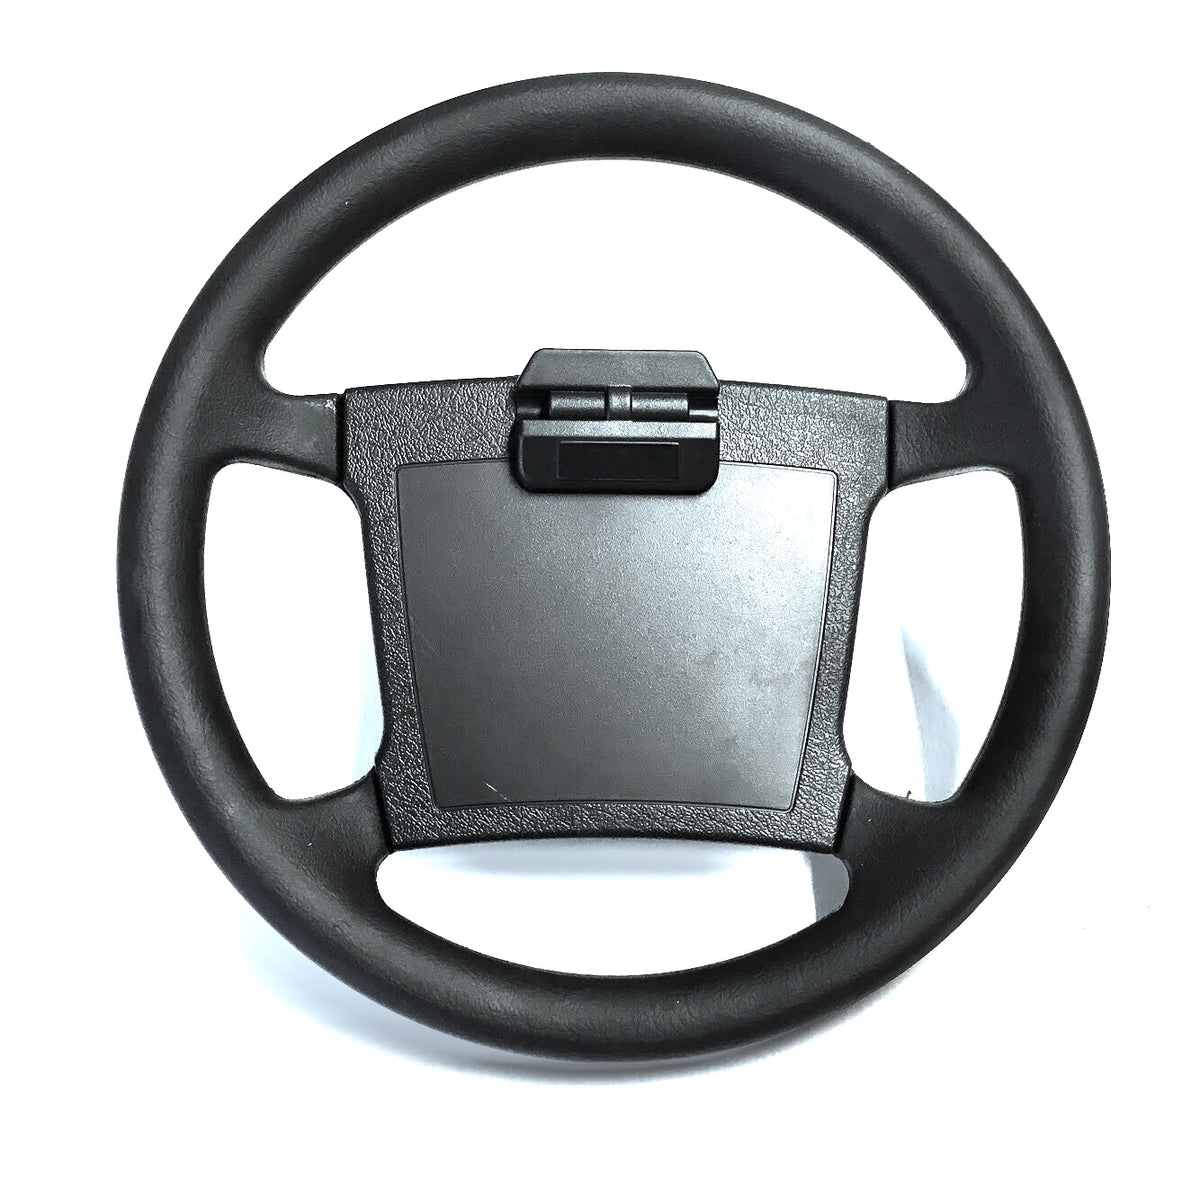 EMC STEERING WHEEL ASSEMBLY TO SUIT MOST EMC MODELS